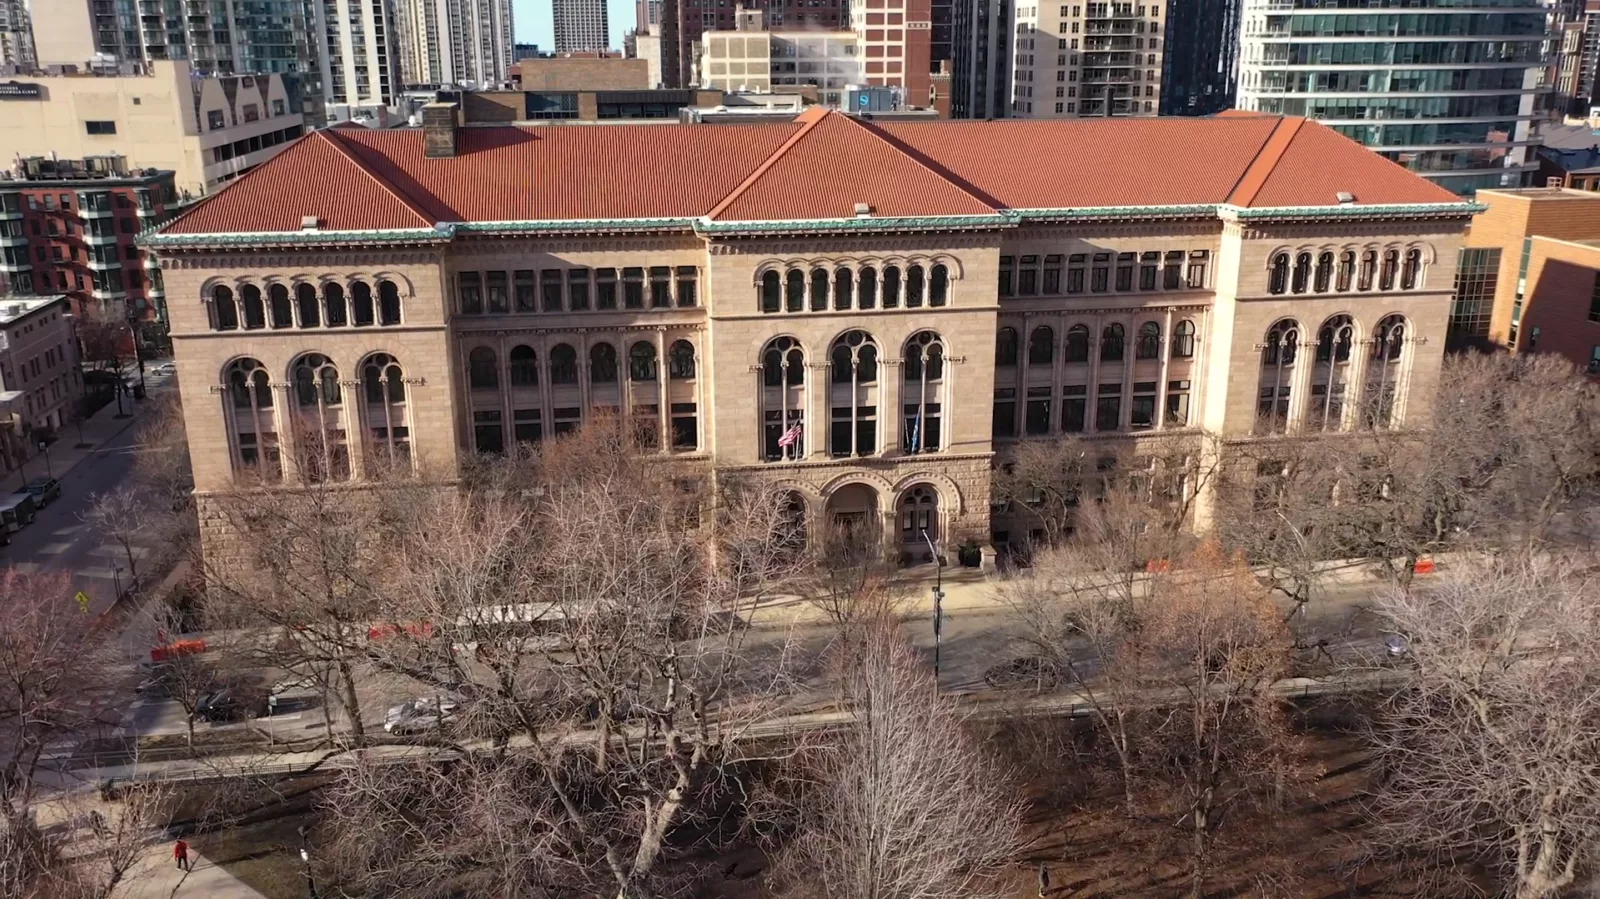 An aerial photograph of the Newberry shows the full front facade of the building.